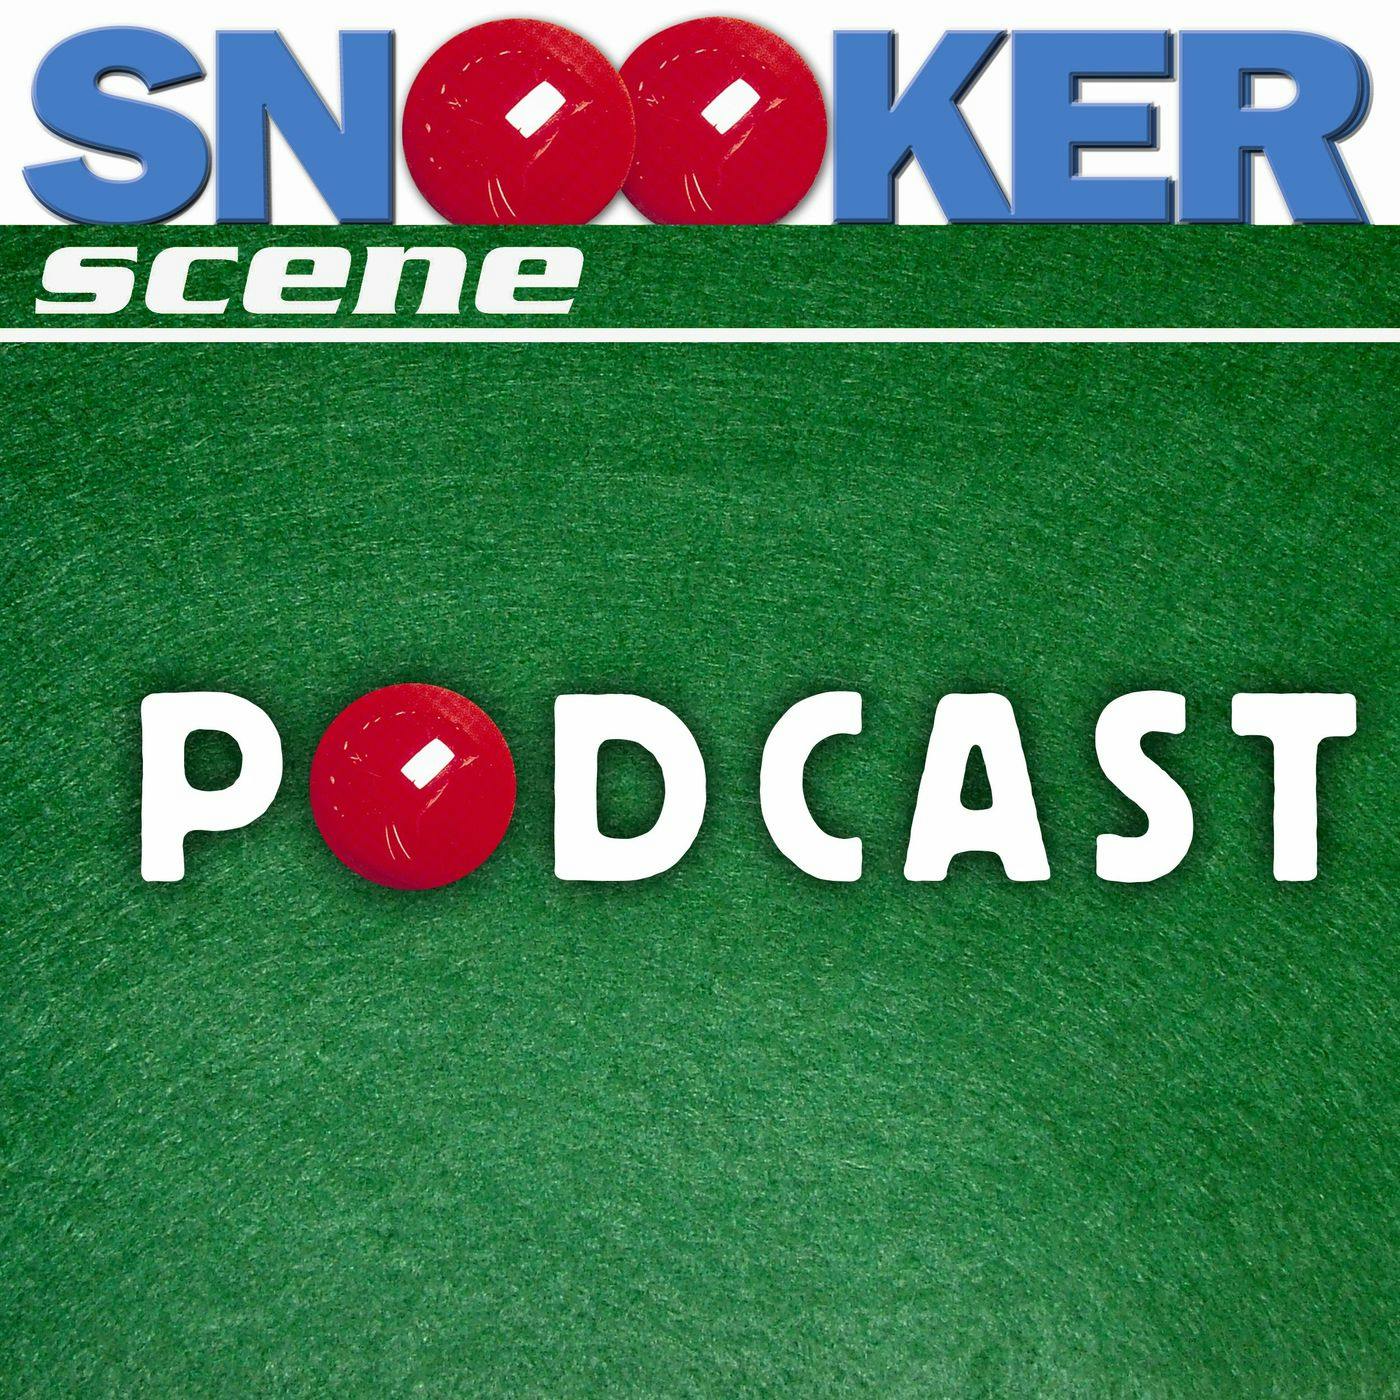 Snooker Scene Podcast episode 166 - Great Moments of the British Open